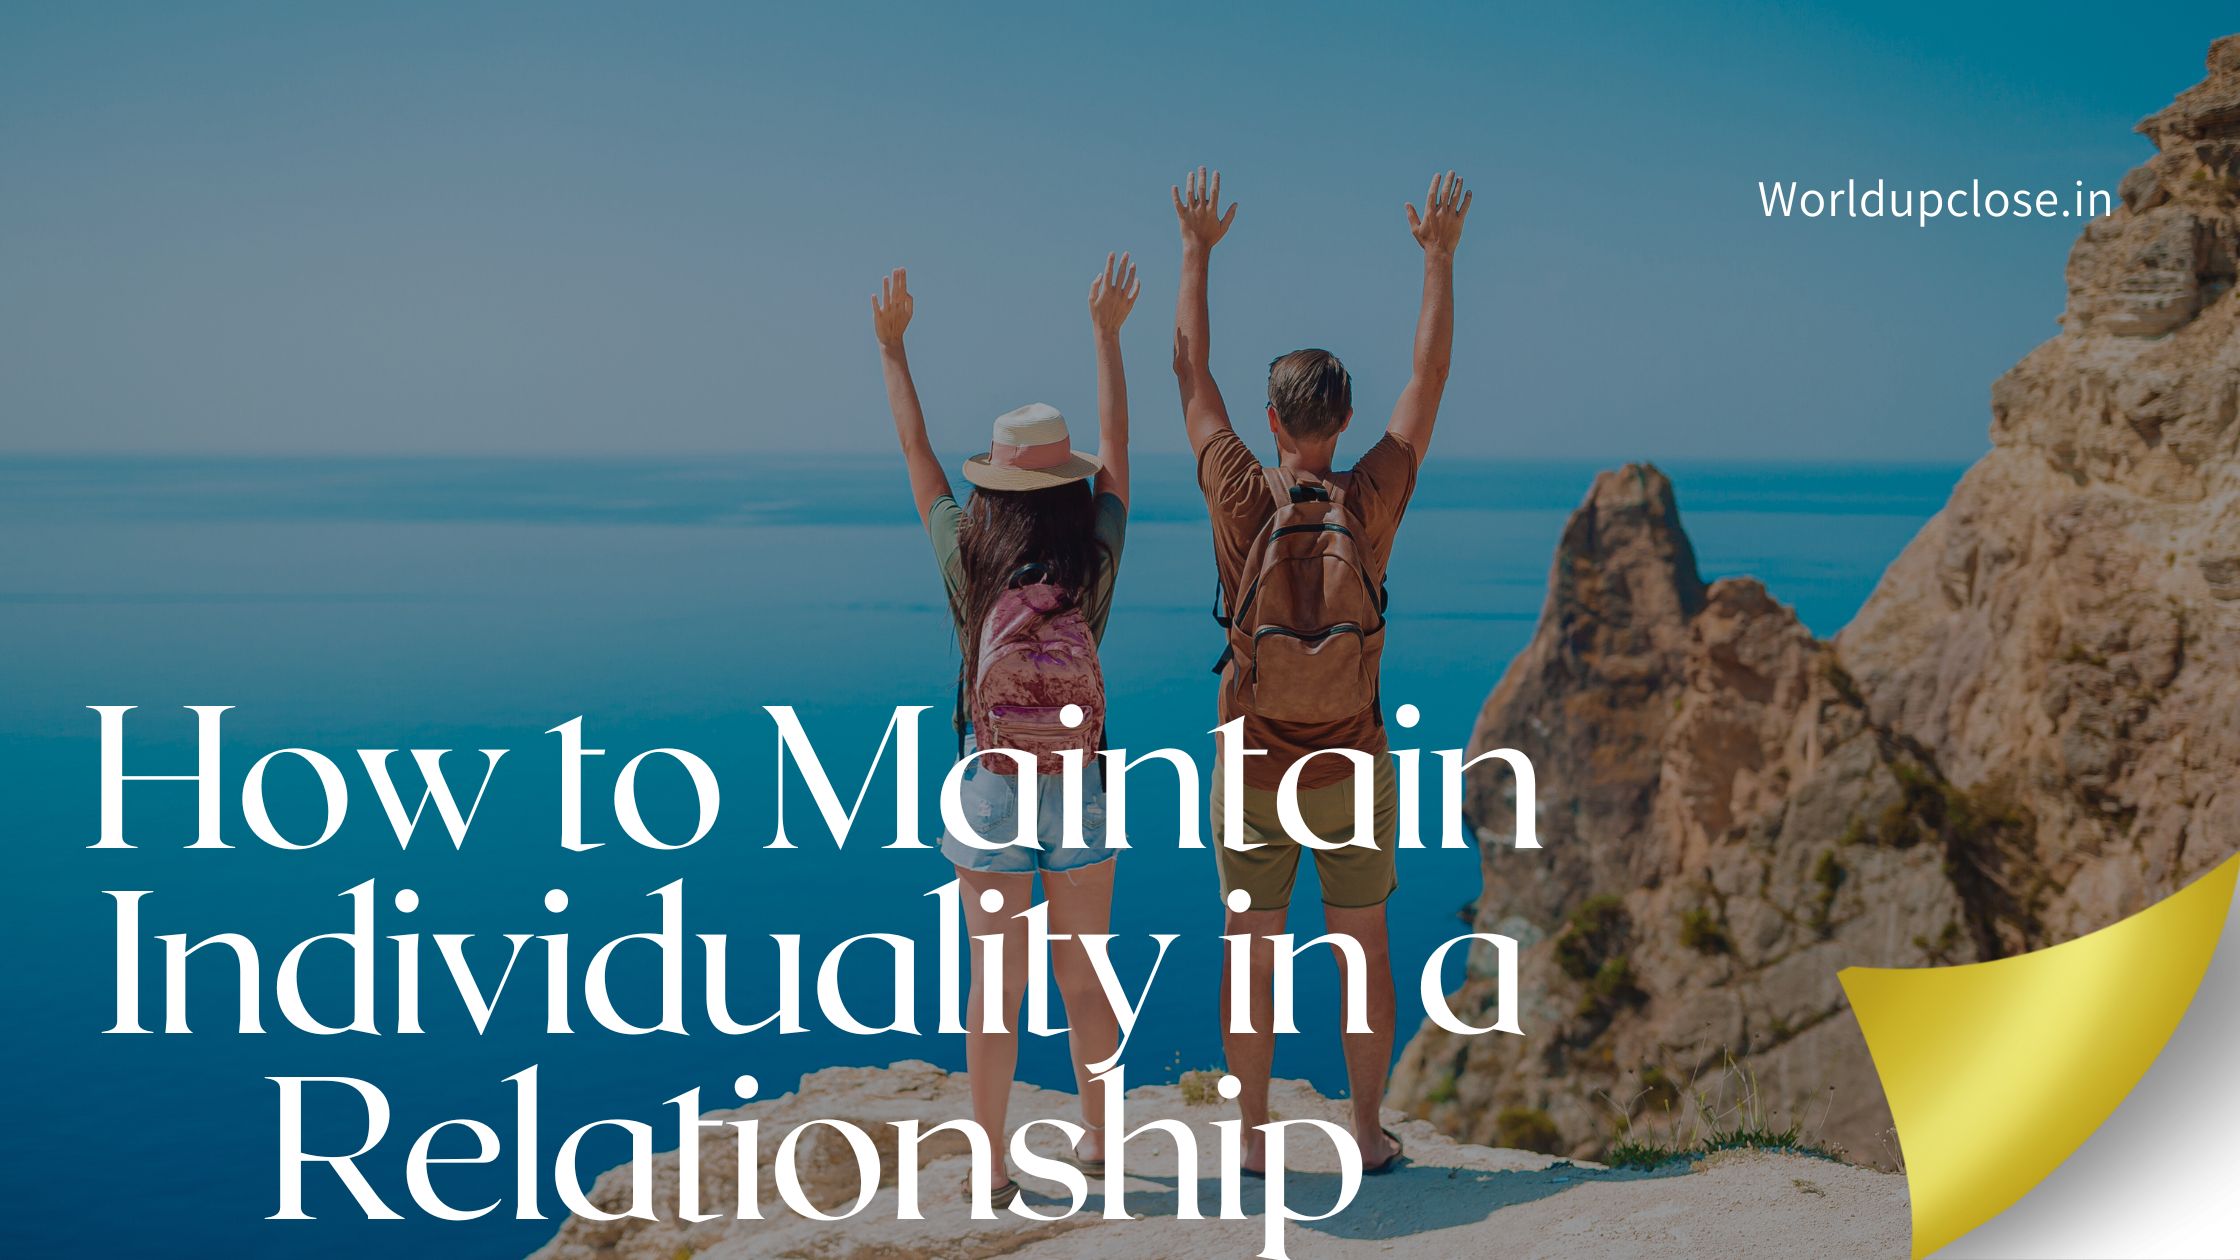 How to Maintain Individuality in a Relationship - 12 Successful Ways 21